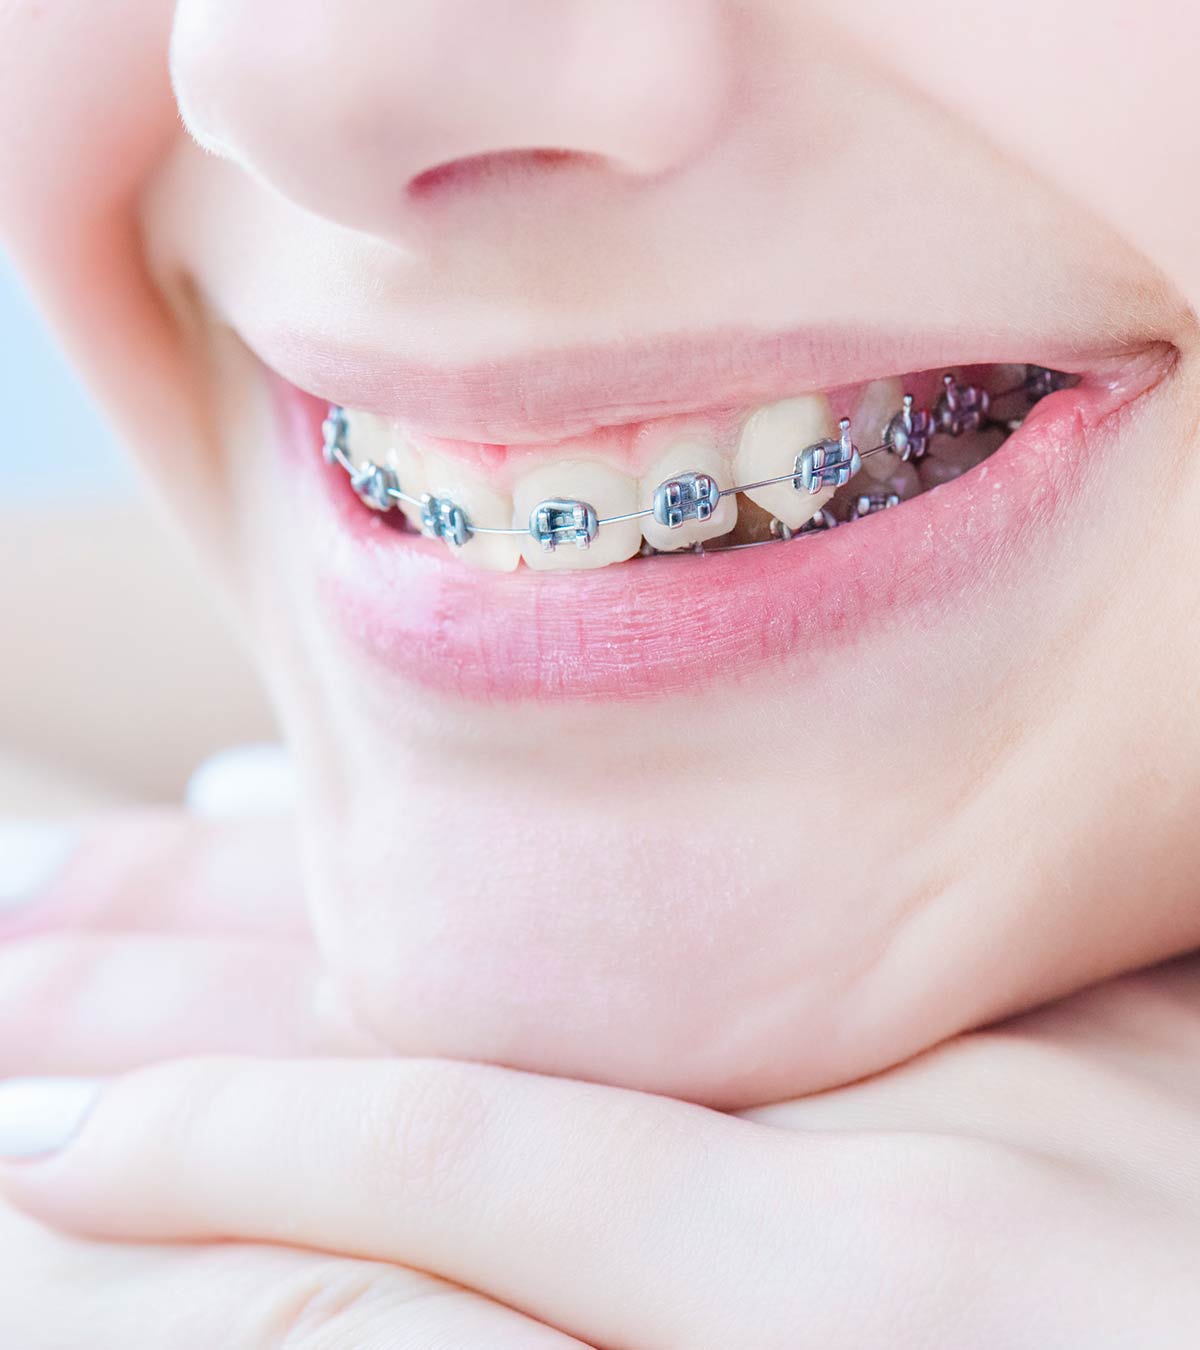 Braces For Kids: Right Age To Get Them And Dental Care To Take